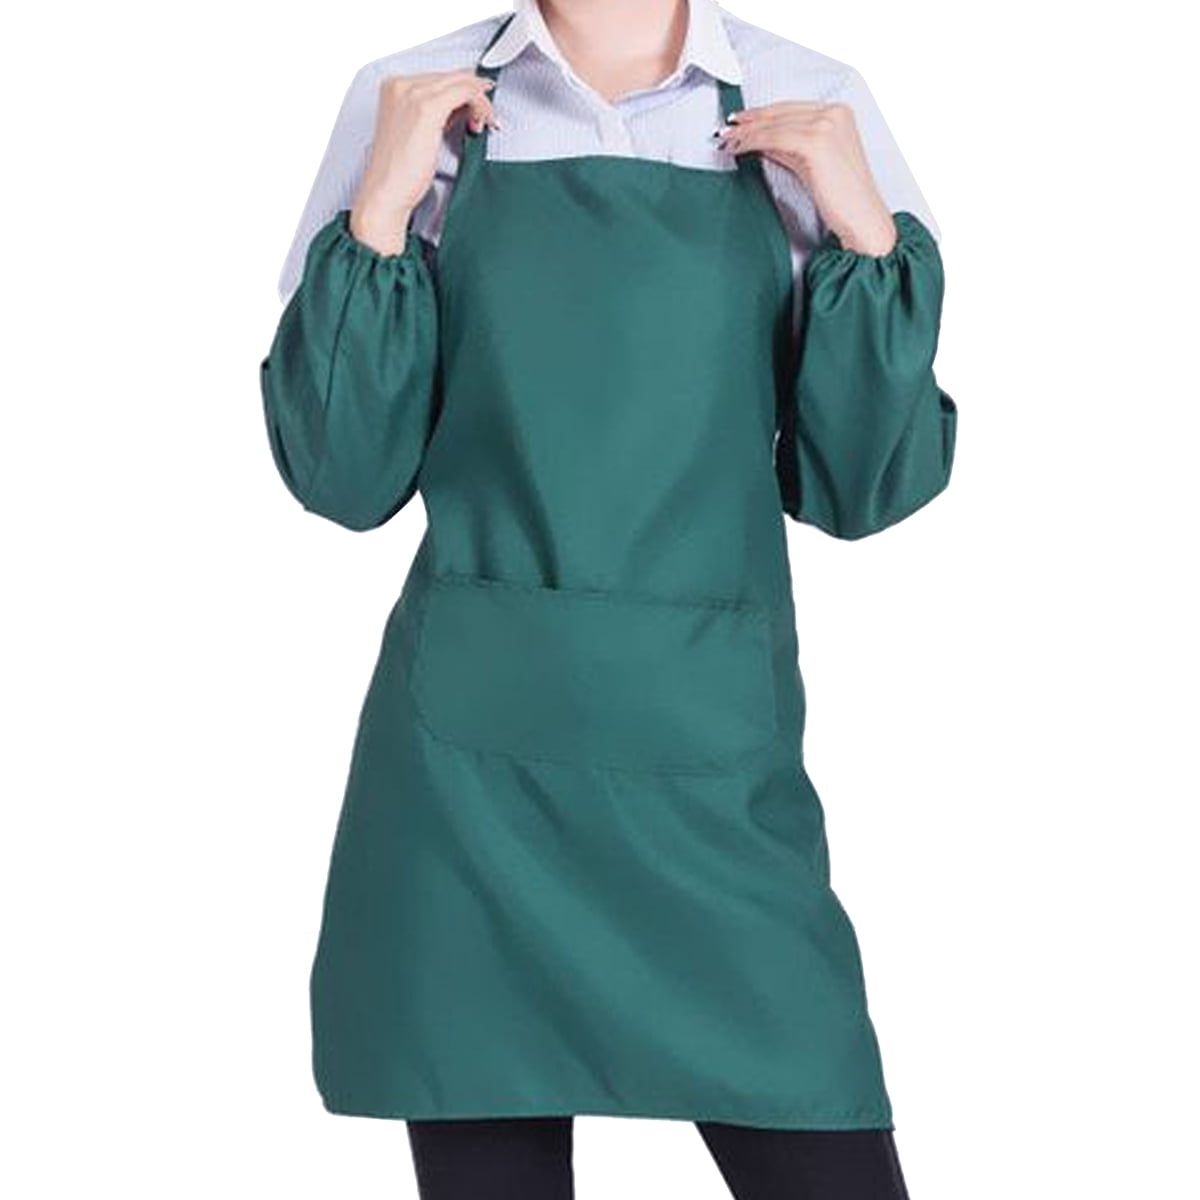 Unisex Tabard Work Apron With Pockets Catering Cafe Bookstore Washable Workwear 